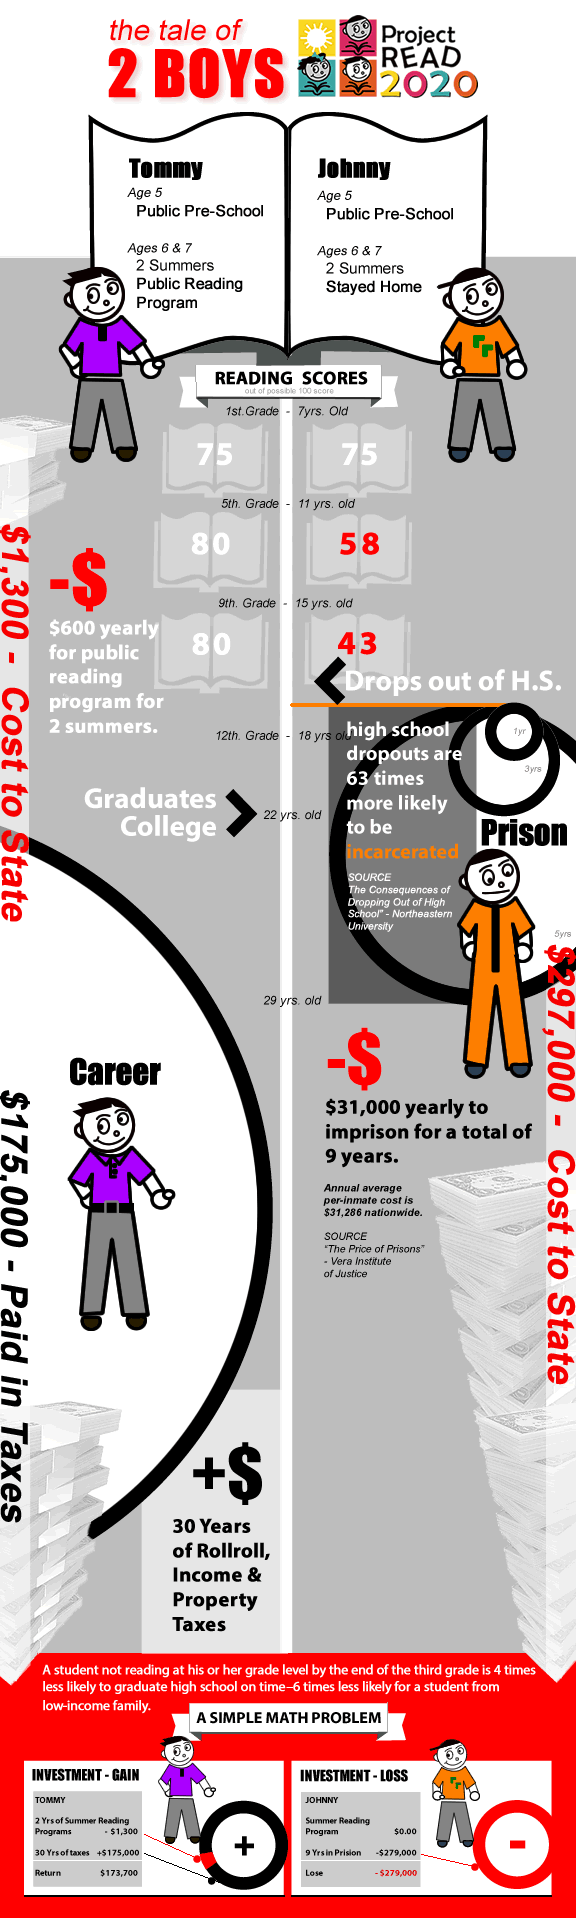 The Tale of 2 Boys - illiteracy and incarceration Infographic